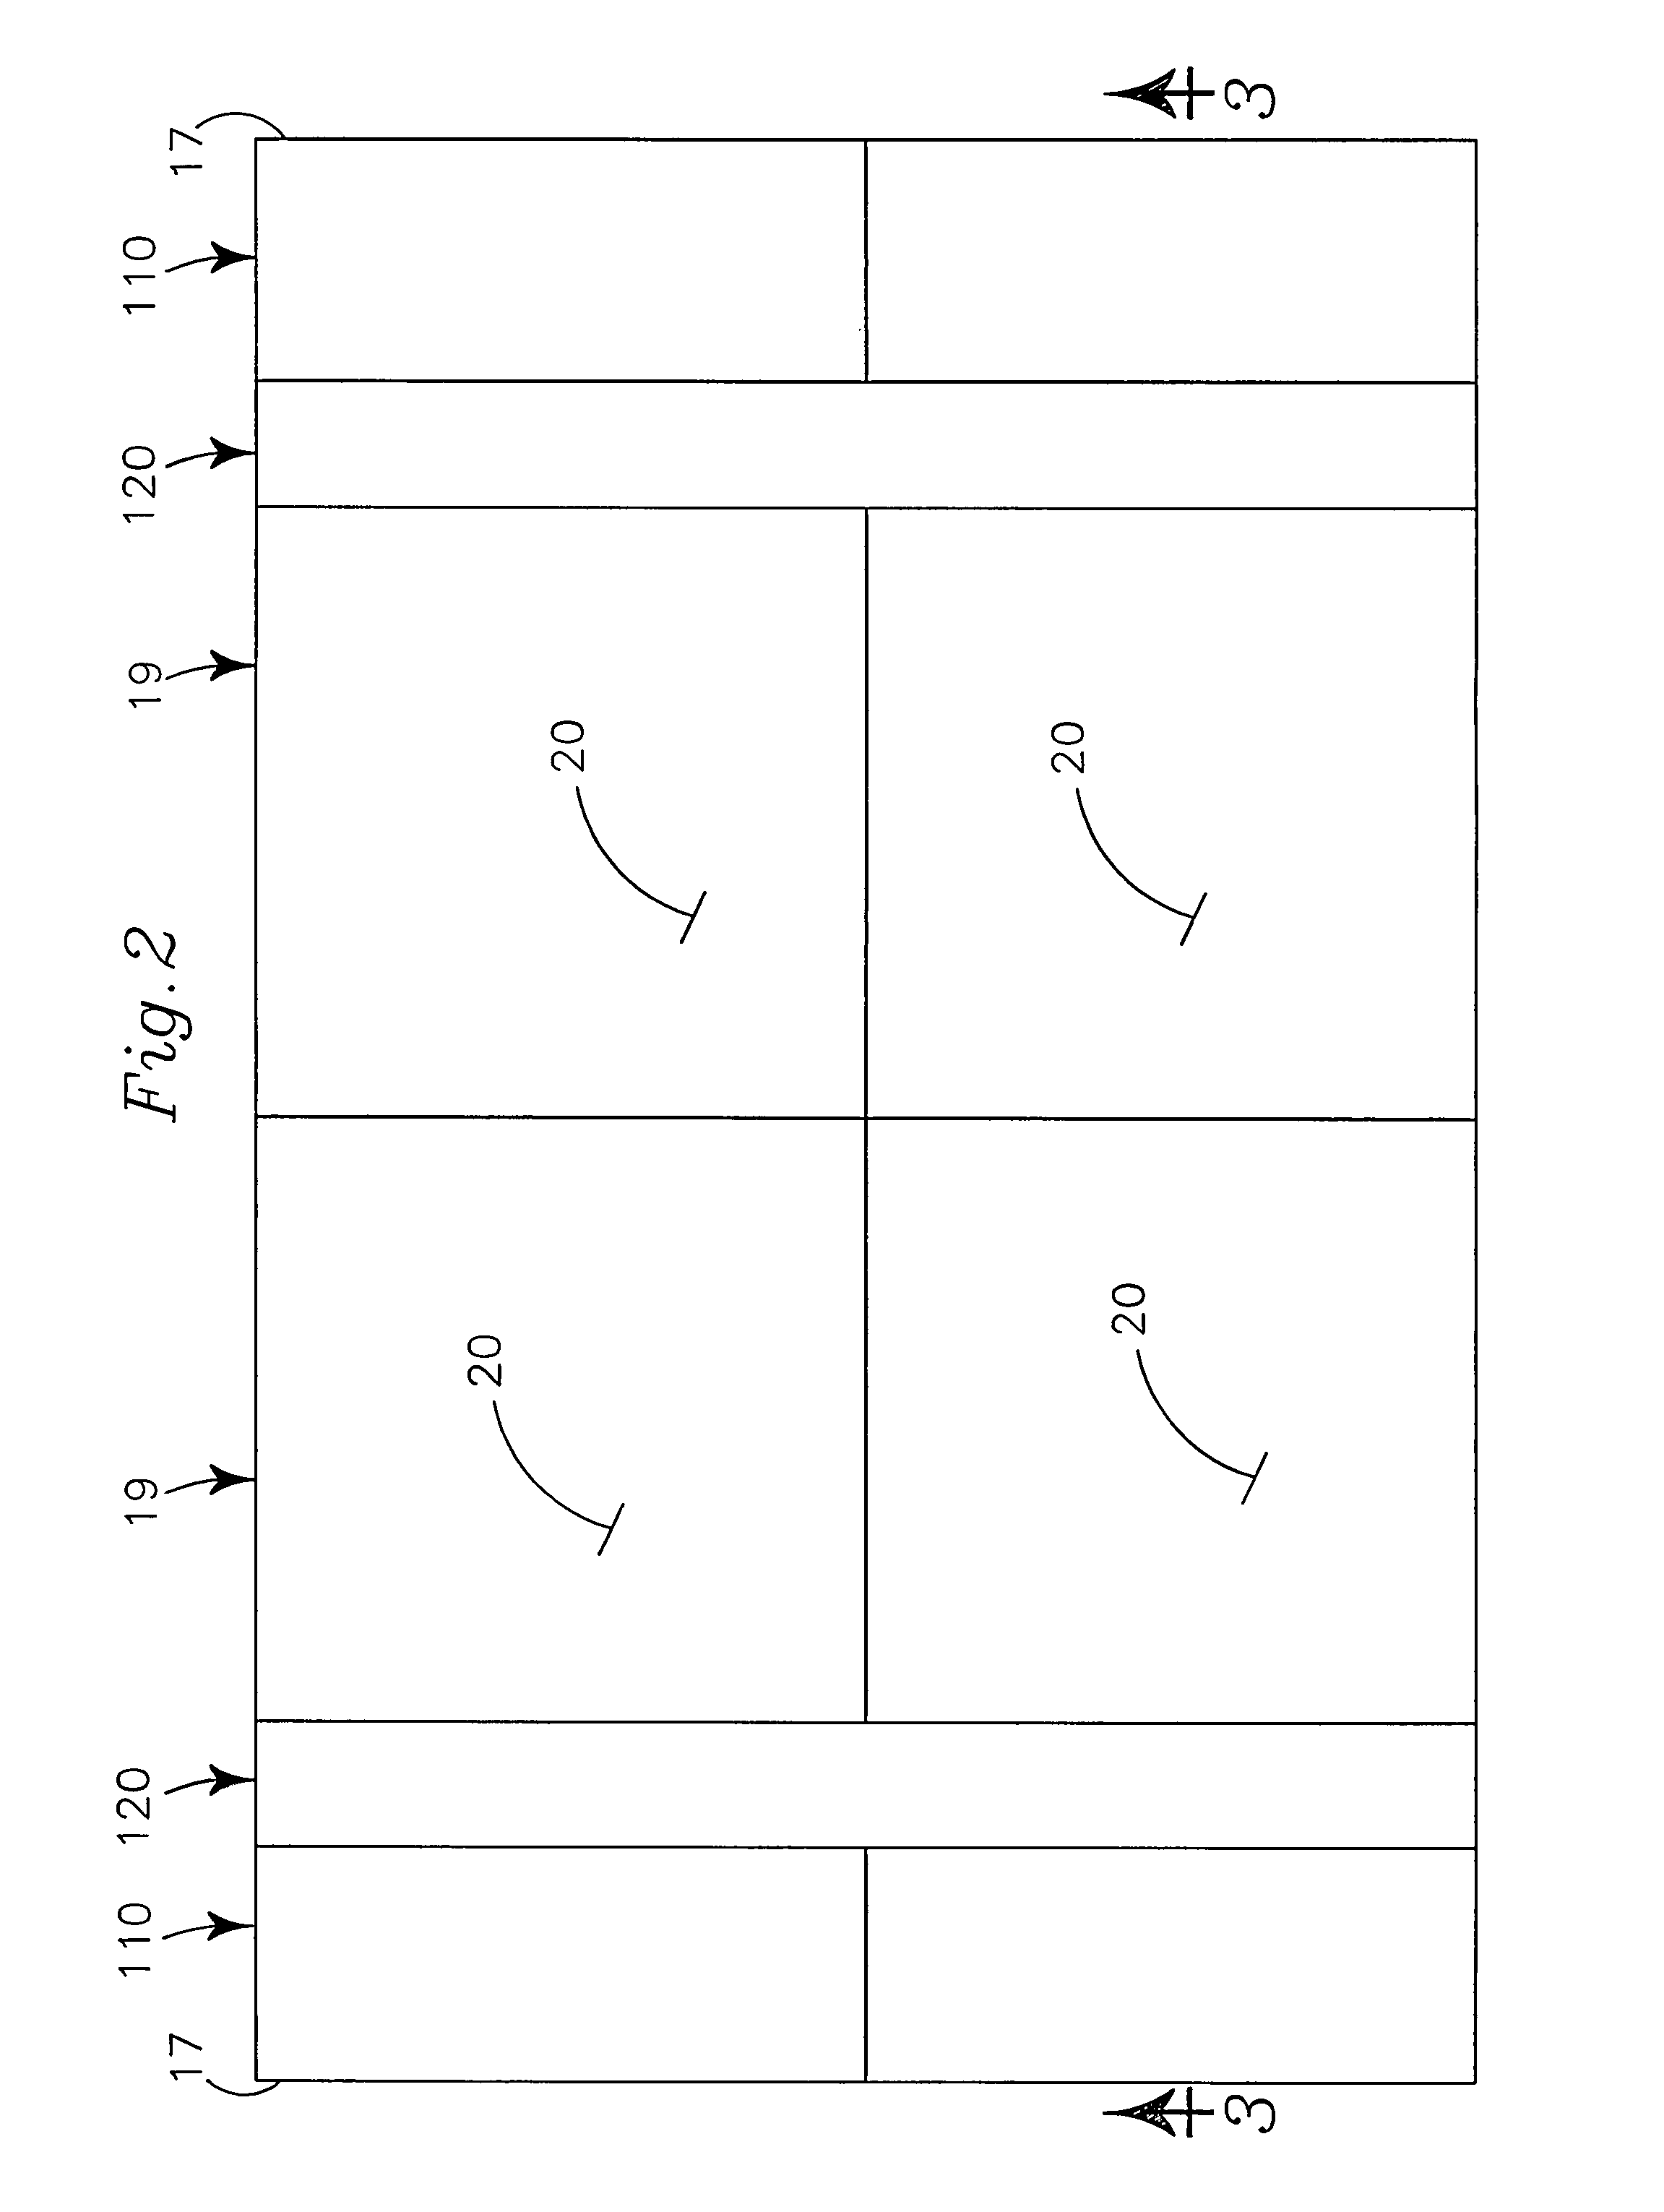 Method and system for collecting, storing and distributing solar energy using networked trafficable solar panels